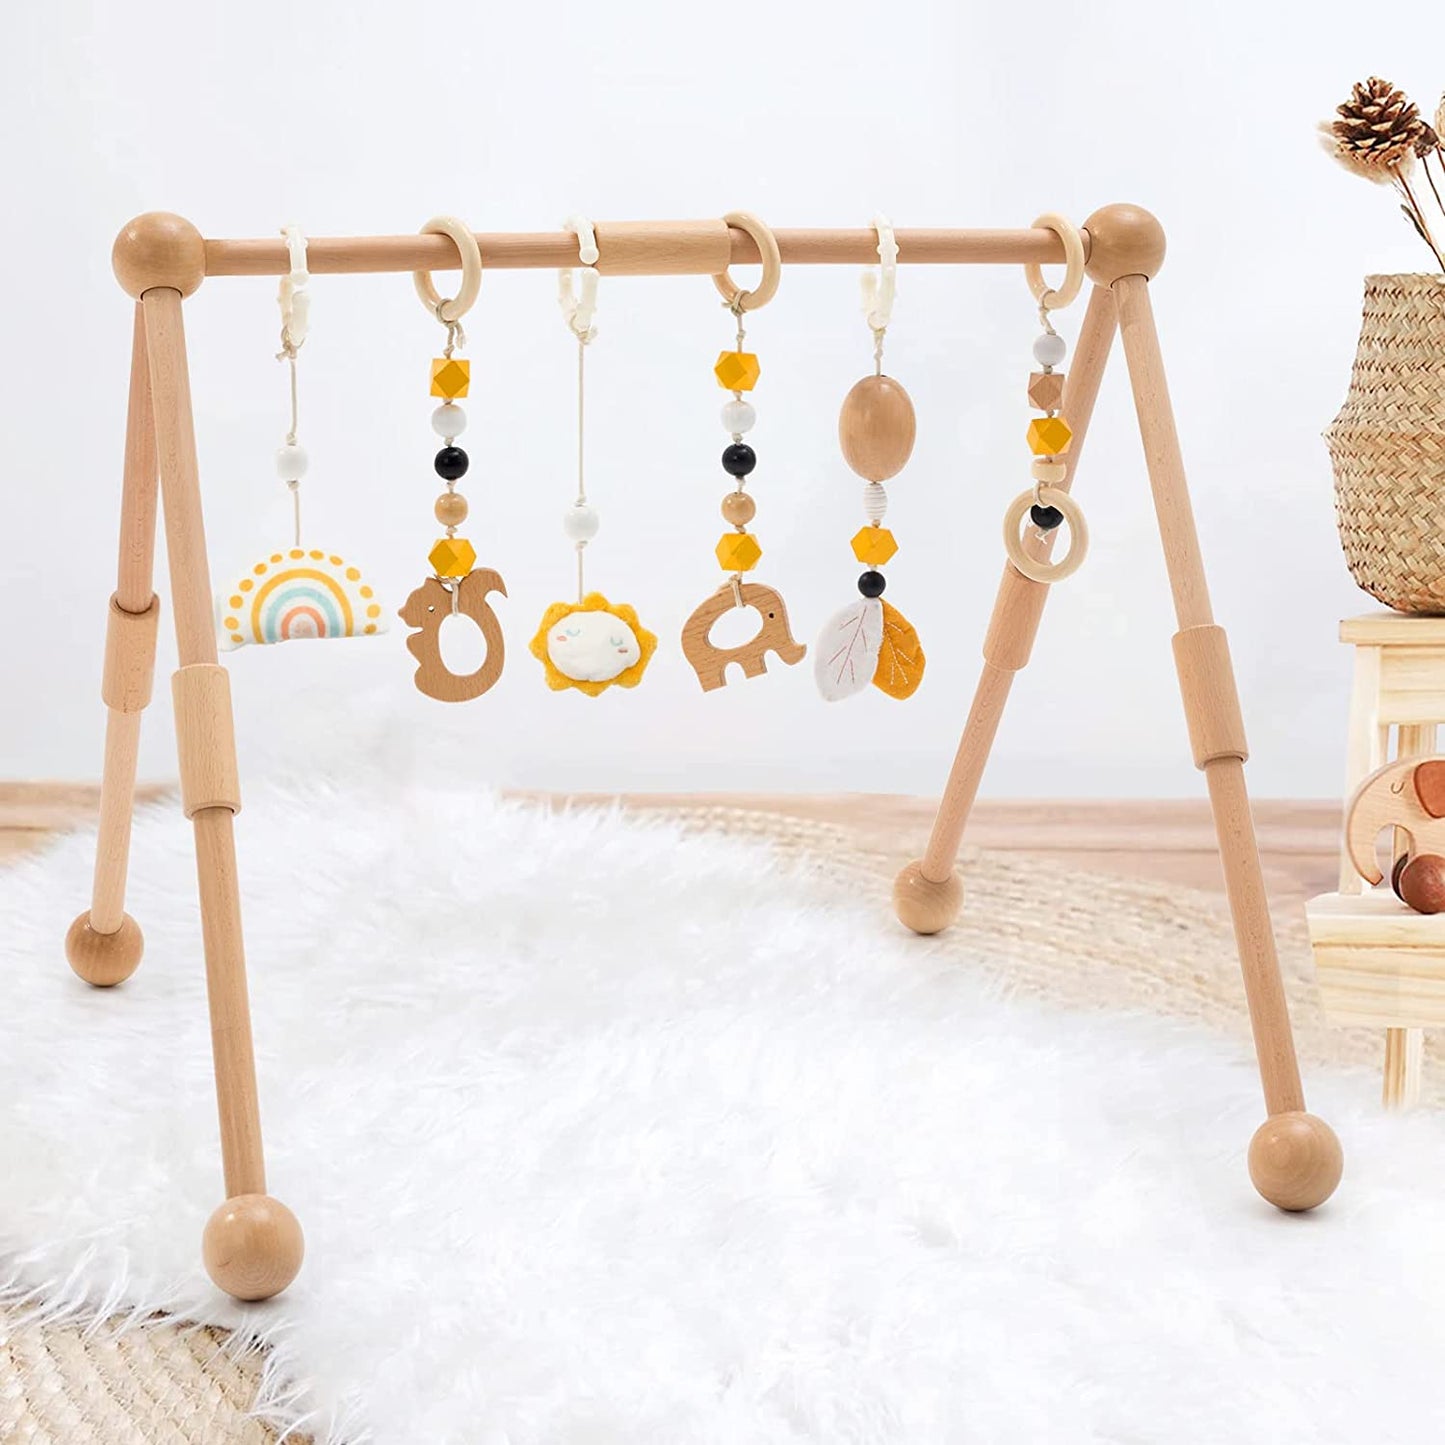 Golener Baby Play Gym Wooden Baby Gym with 6 Infant Activity Toys,Foldable  Frame Hanging Bar,Toddler Activity Center with Pull Ring,Wood Gyms for